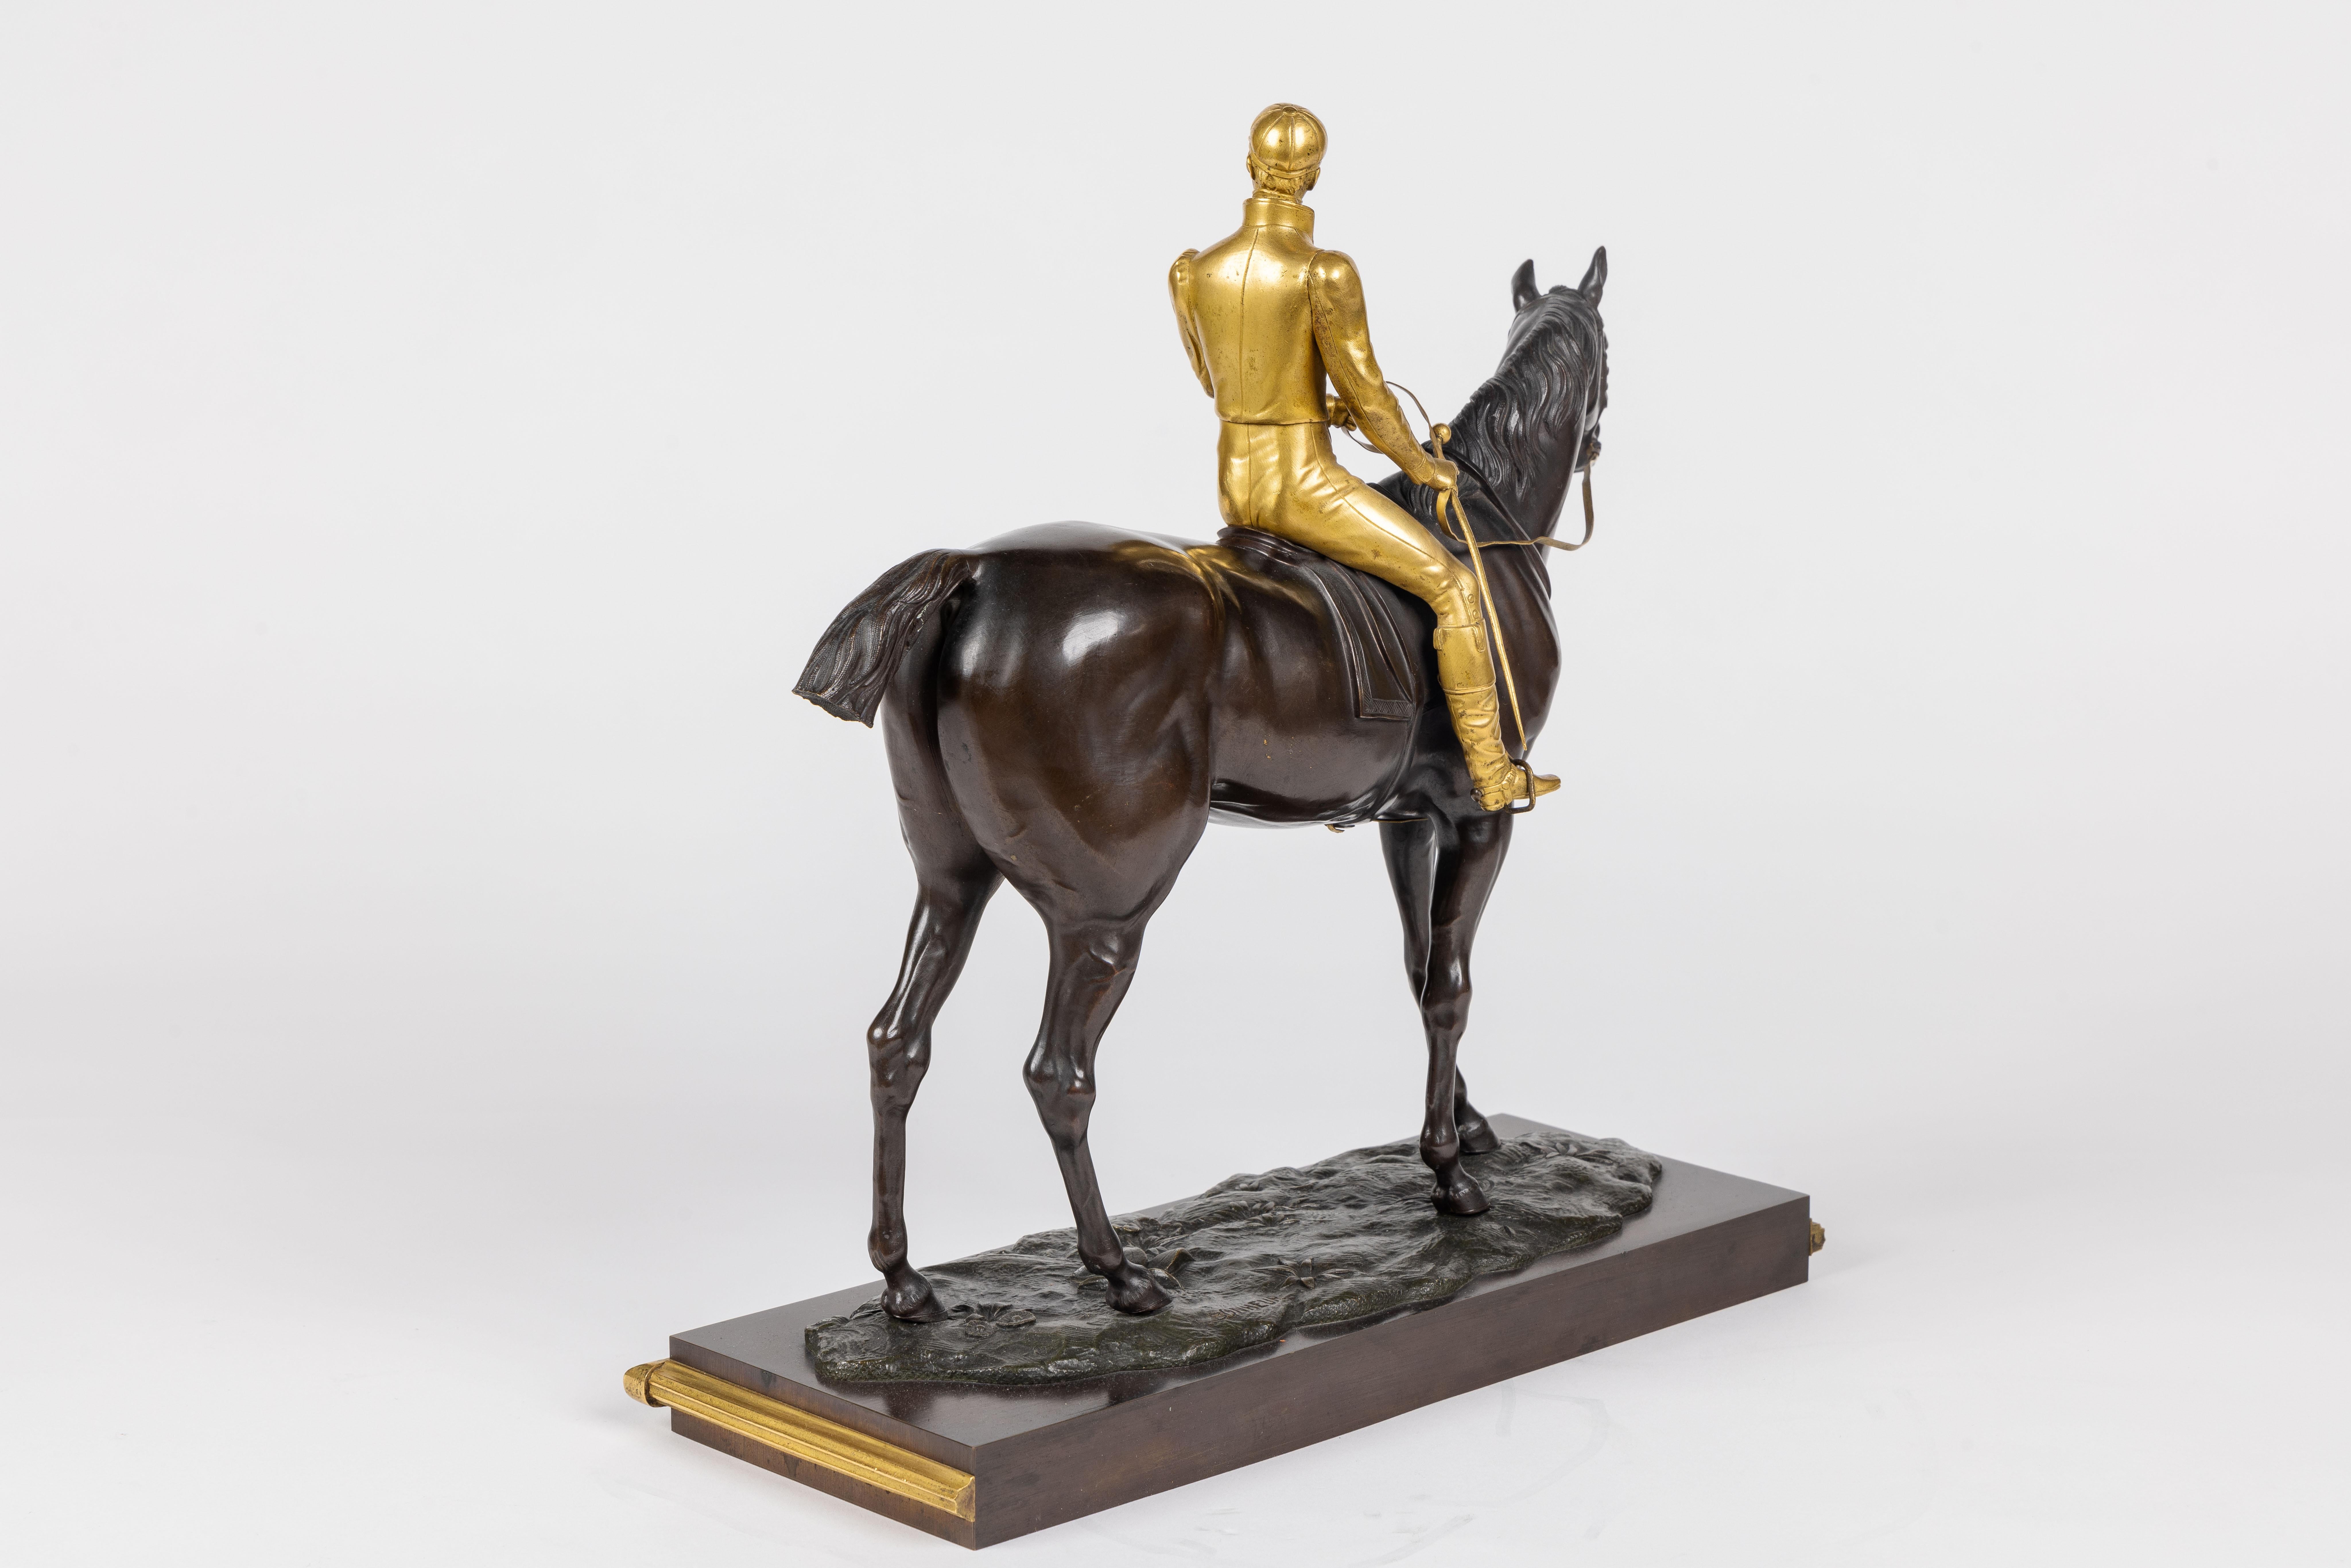 A Rare Gilt and Patinated Bronze Jockey on A Horse, circa 1875 - Gold Figurative Sculpture by Isidore Jules Bonheur